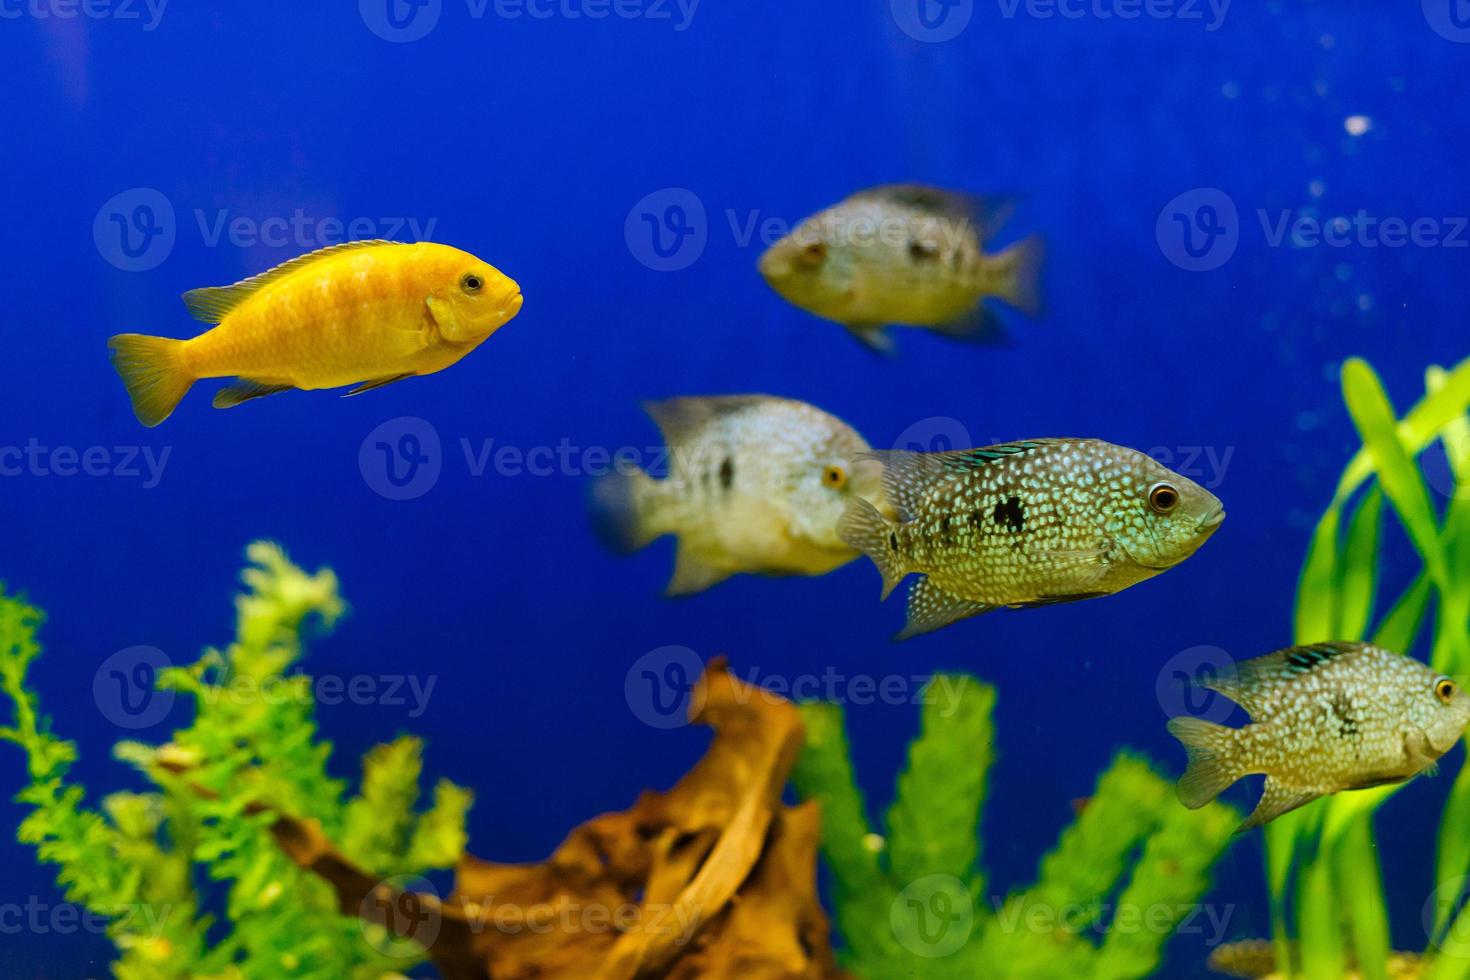 Yellow fish on coral reef fish keeping blue water background photo